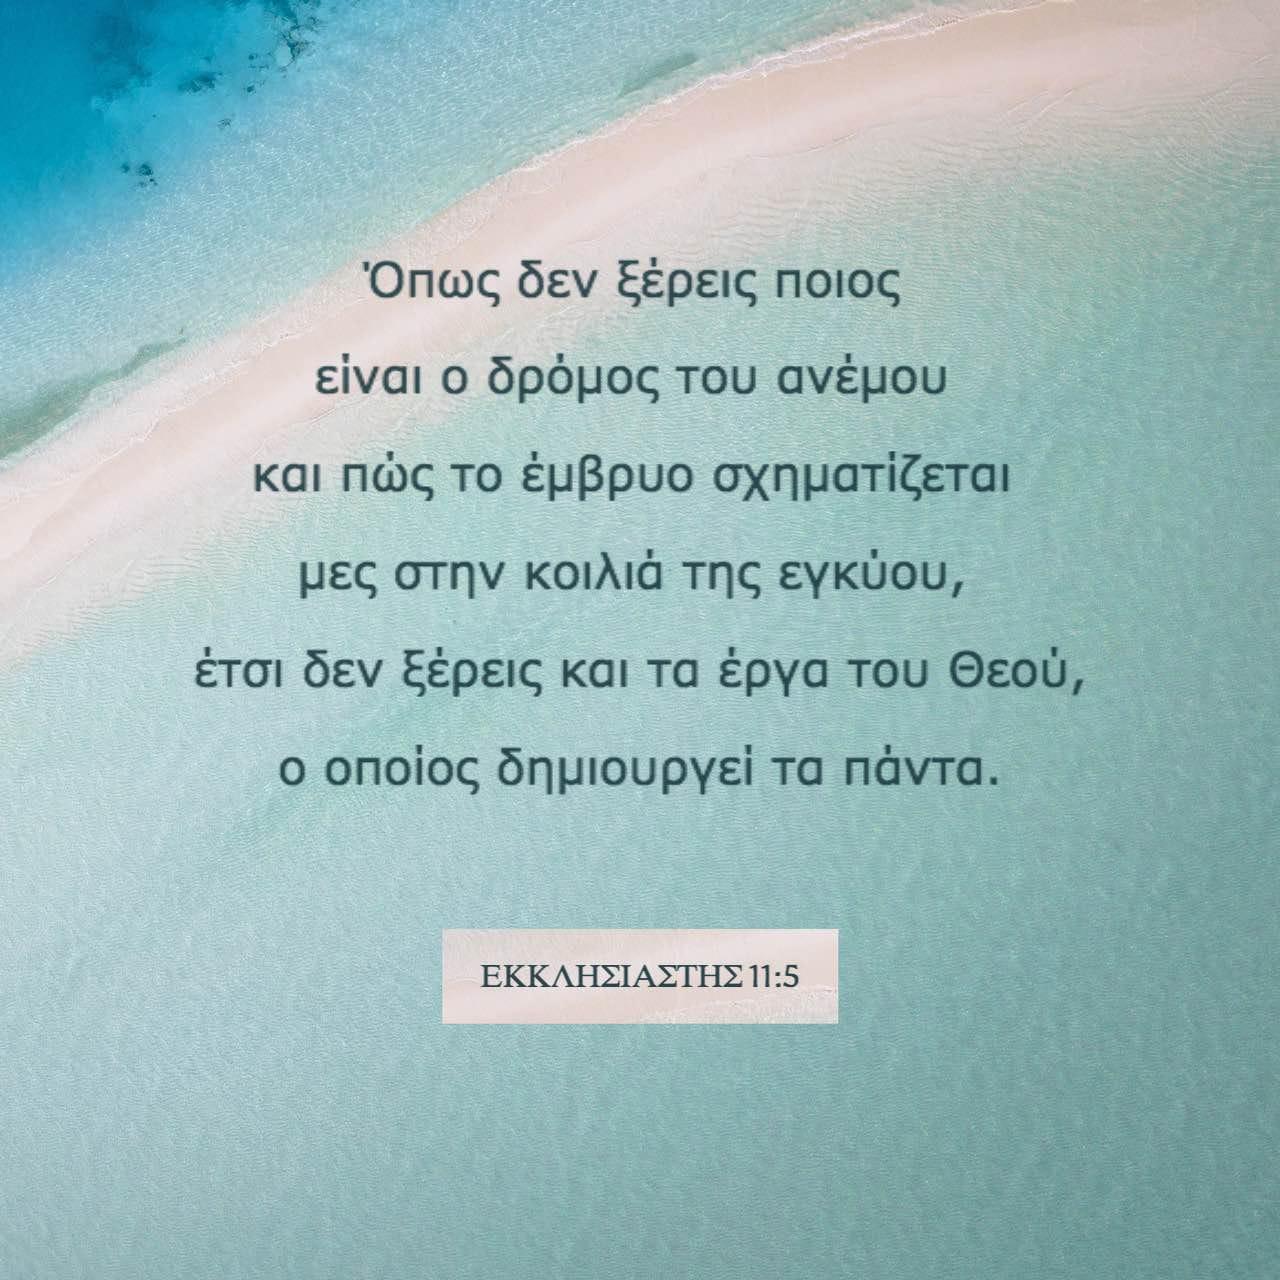 Bible Verse of the Day - day 150 - image 26822 (ΕΚΚΛΗΣΙΑΣΤΗΣ 11:5)